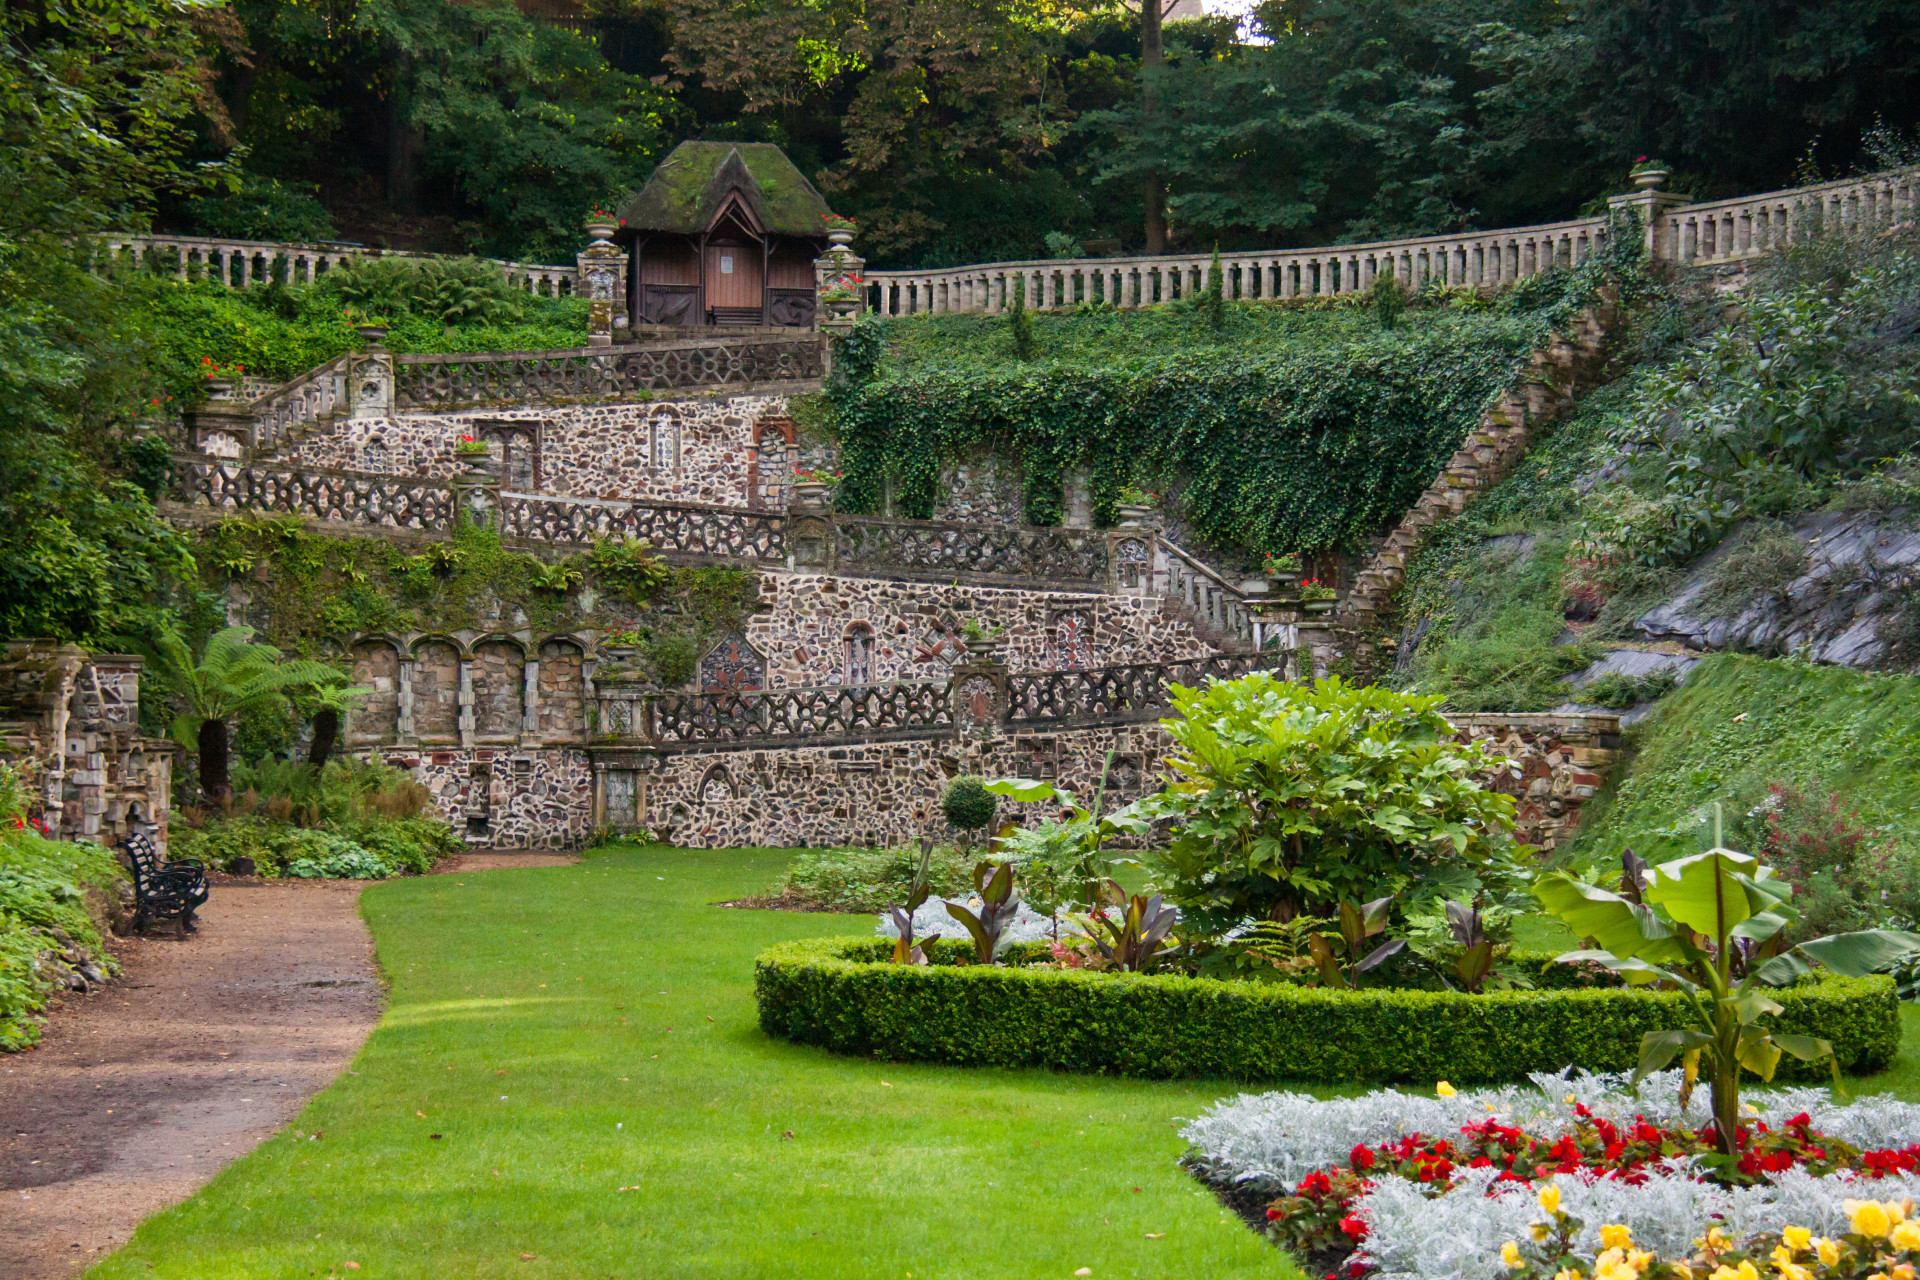 <p>The Plantation Garden in Norwich is a beautiful Victorian, Gothic-style garden in the city centre. The garden boasts flowerbeds, Gothic fountains, an Italian terrace, a cathedral, and woodlands.</p> <p>See also: <a href="https://www.starsinsider.com/travel/340942/the-beauty-of-spring-around-the-world">The beauty of spring around the world</a></p>